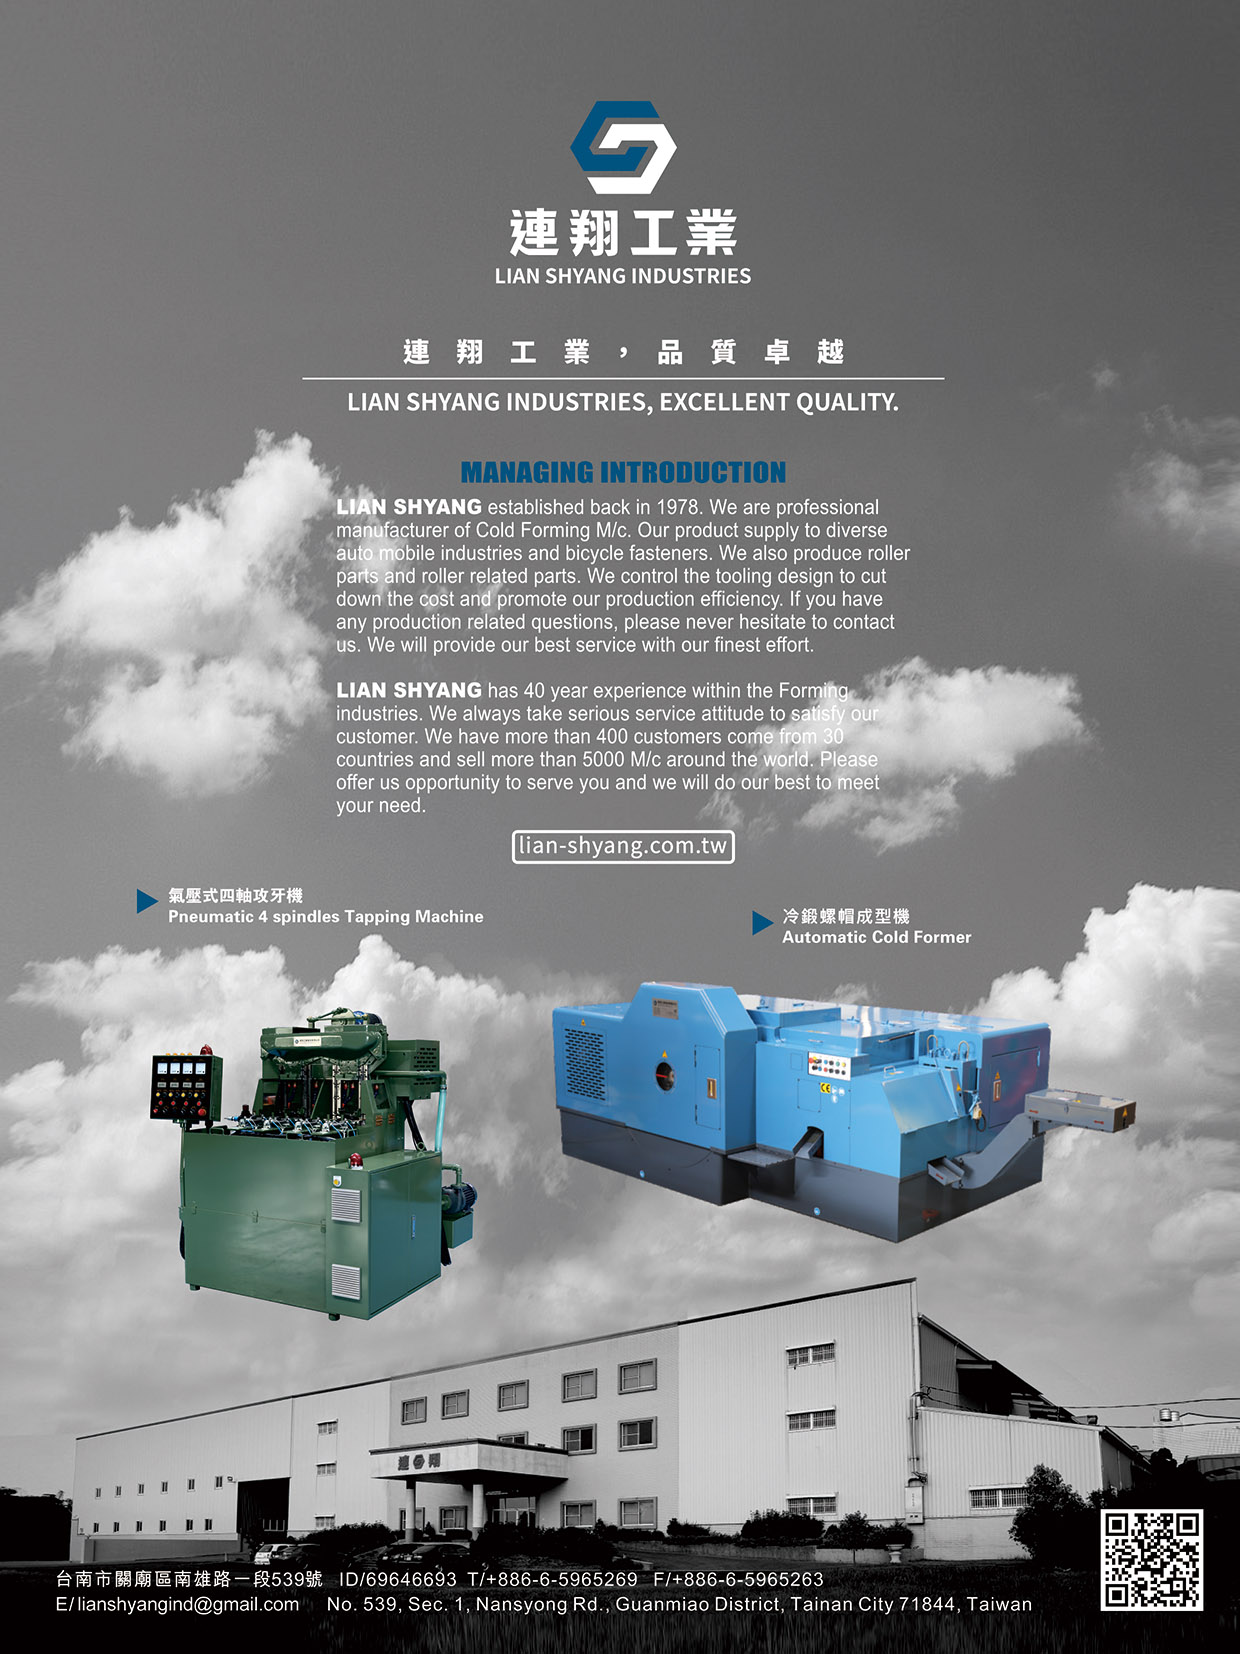 LIAN SHYANG INDUSTRIES CO., LTD. , Cold Forming Machine, Pneumatic 4 Spindles Tapping Machine, Automatic Cold Former , Multi-station Cold Forming Machine